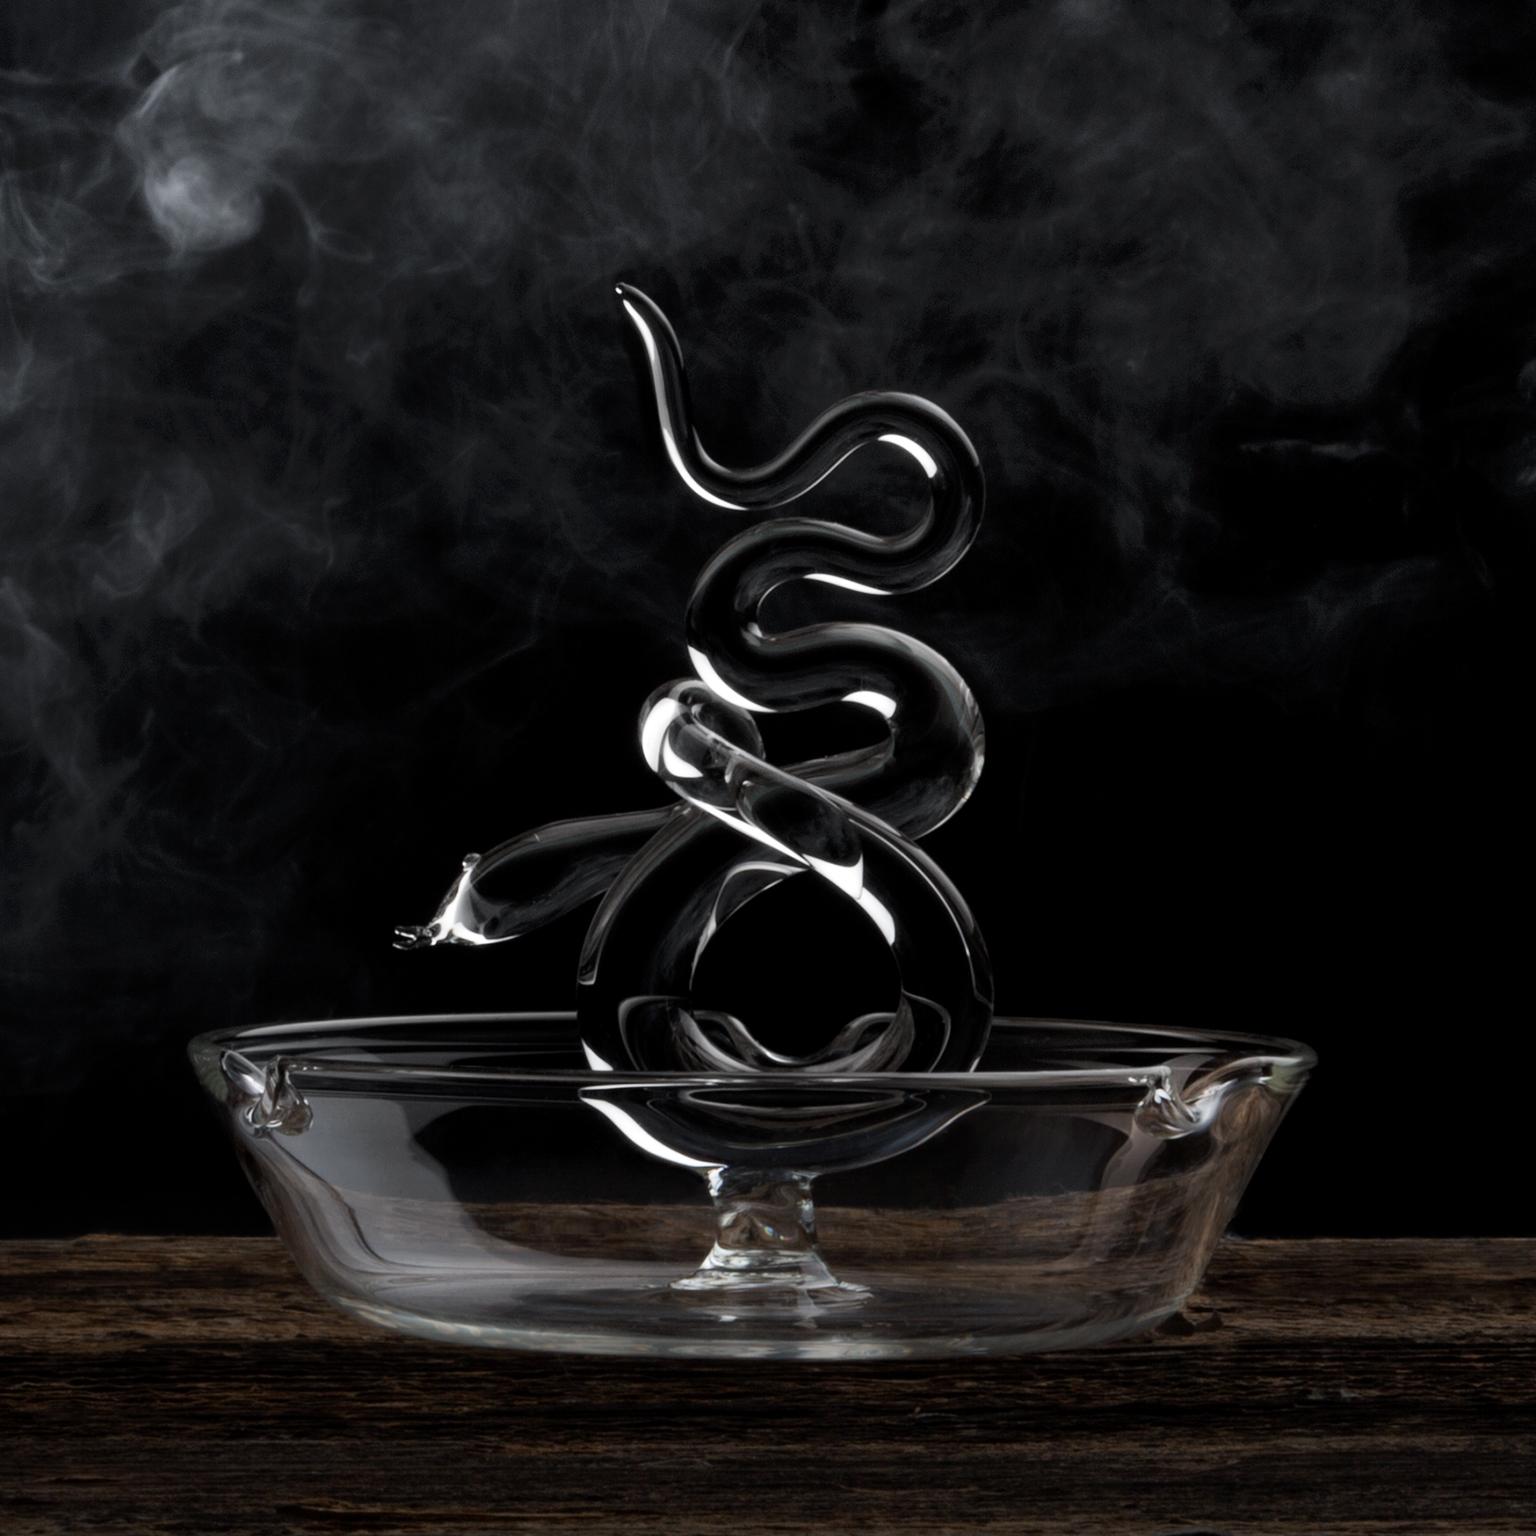 'Serpentine Ashtray'
A Hand-Made Glass Ashtray by Simone Crestani

Serpentine Ashtray is one of the pieces from the Serpentine Collection.

